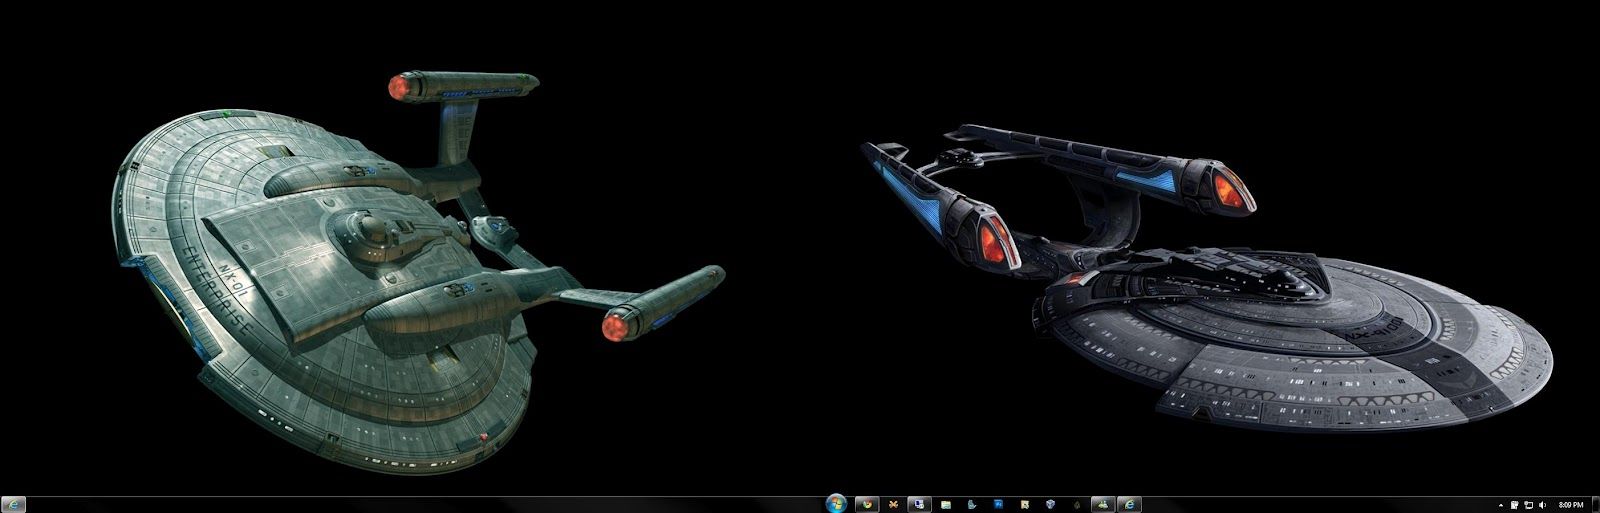 Funny Pictures: Dual monitor wallpaper windows 7- windows 7 dual ...